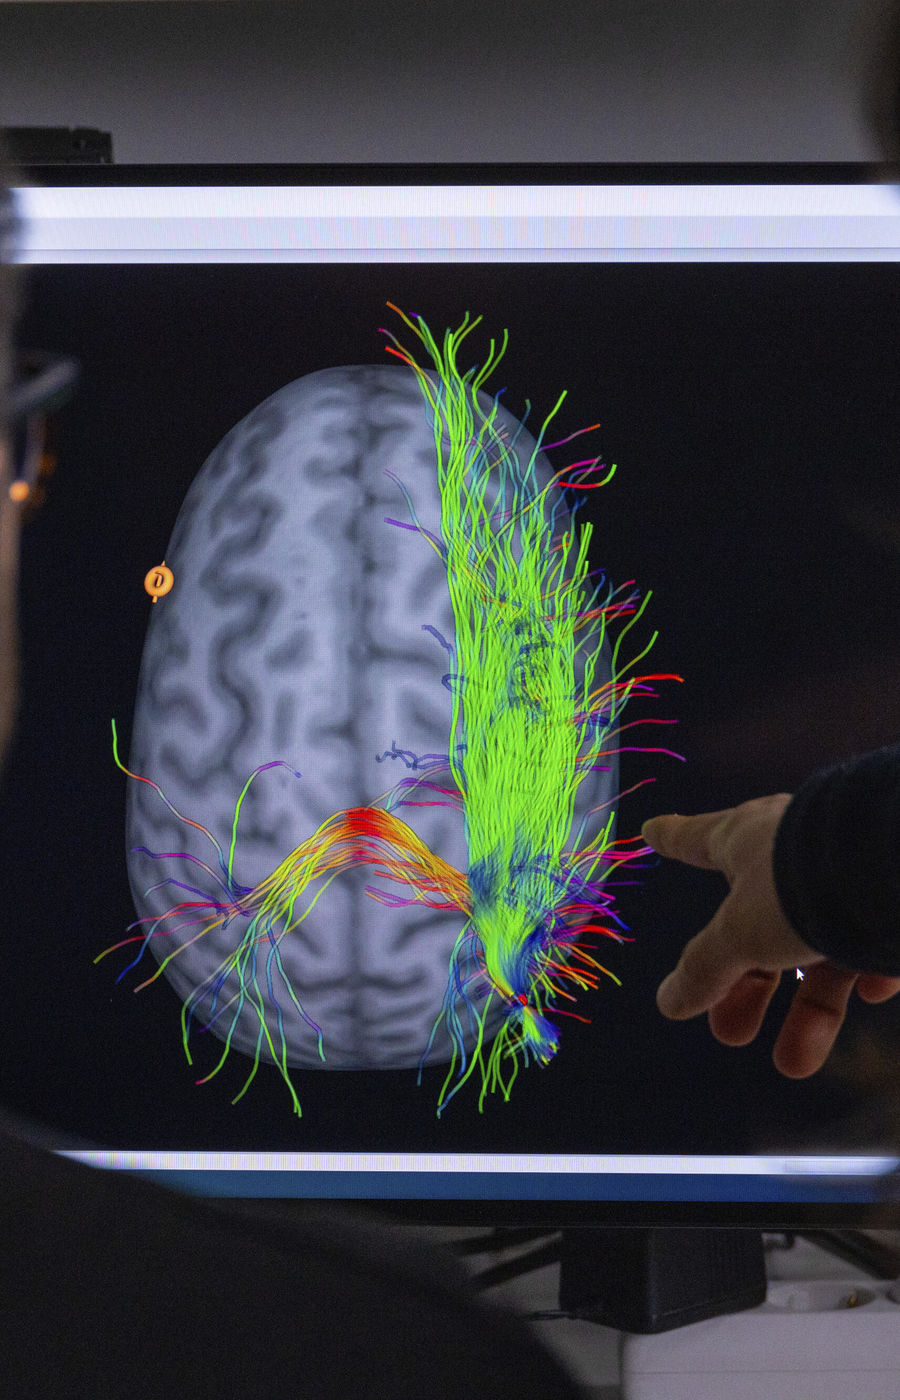 Colourful simulation of the brain activity.